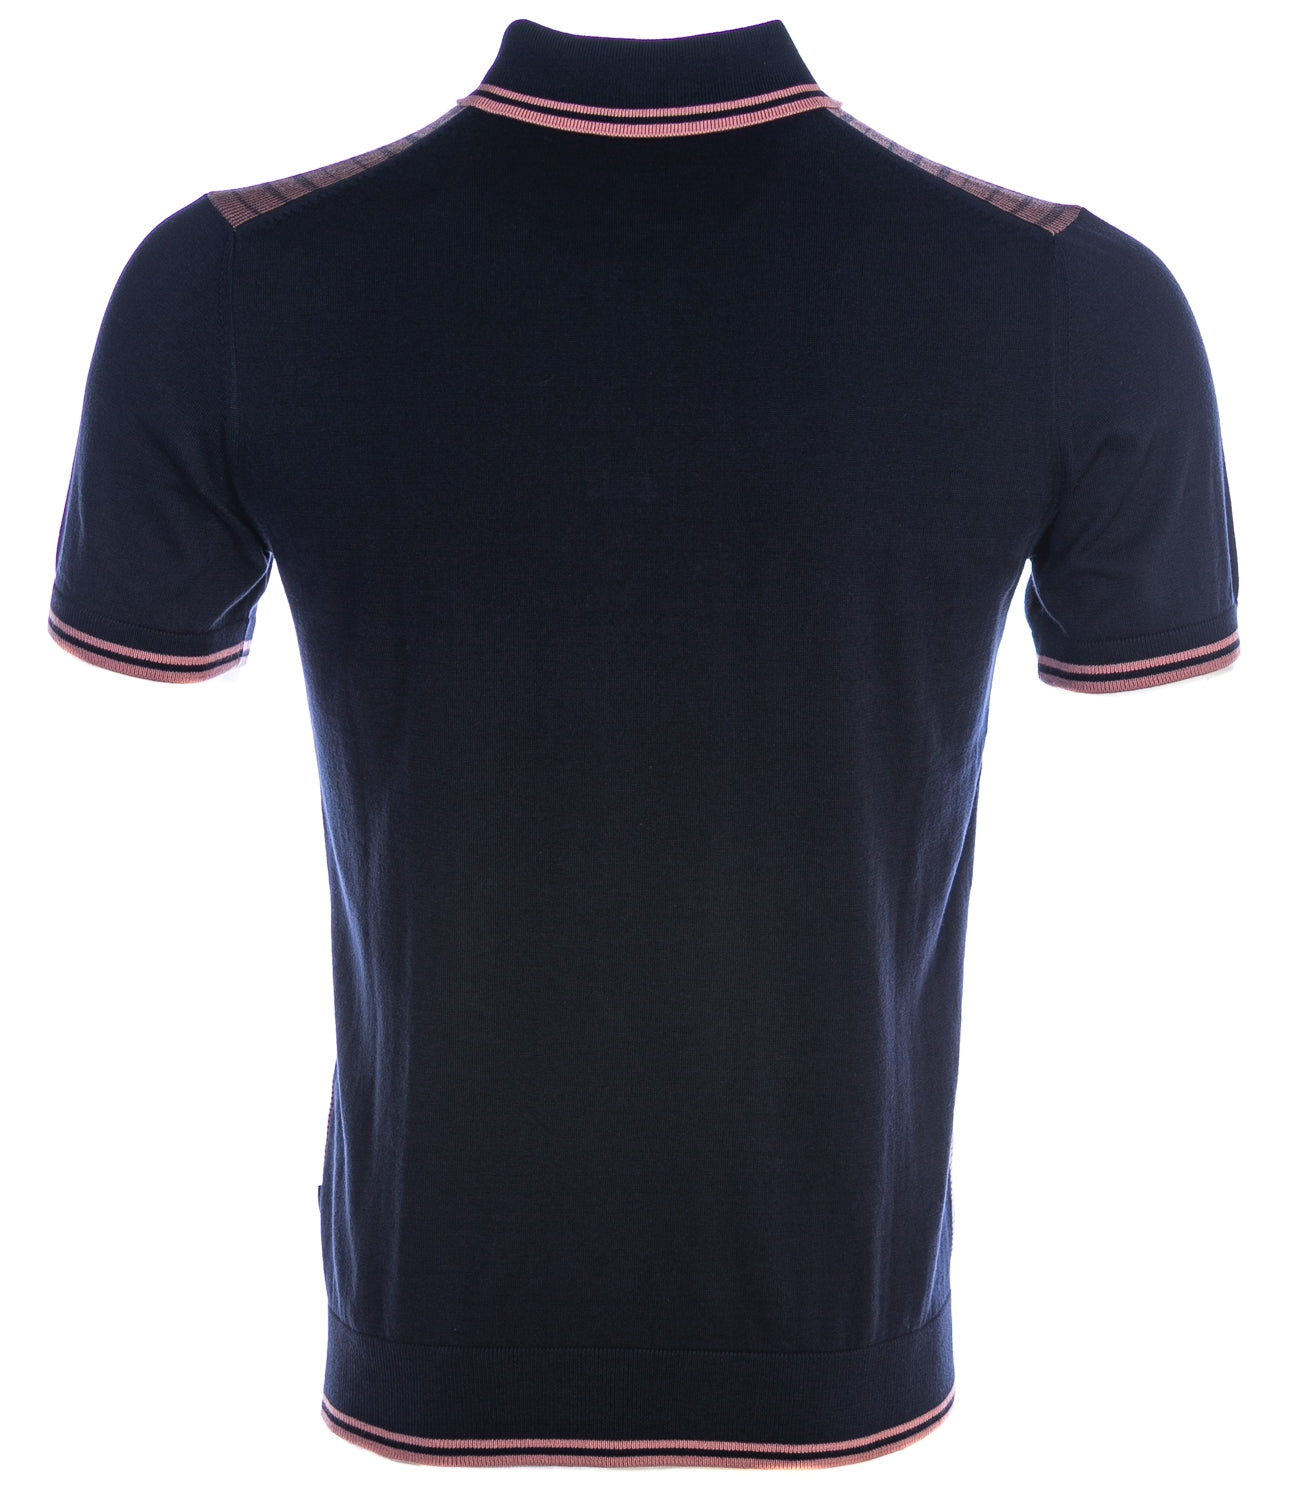 Remus Uomo Abstract Stripe Front Knitted Polo Shirt in Navy & Pink